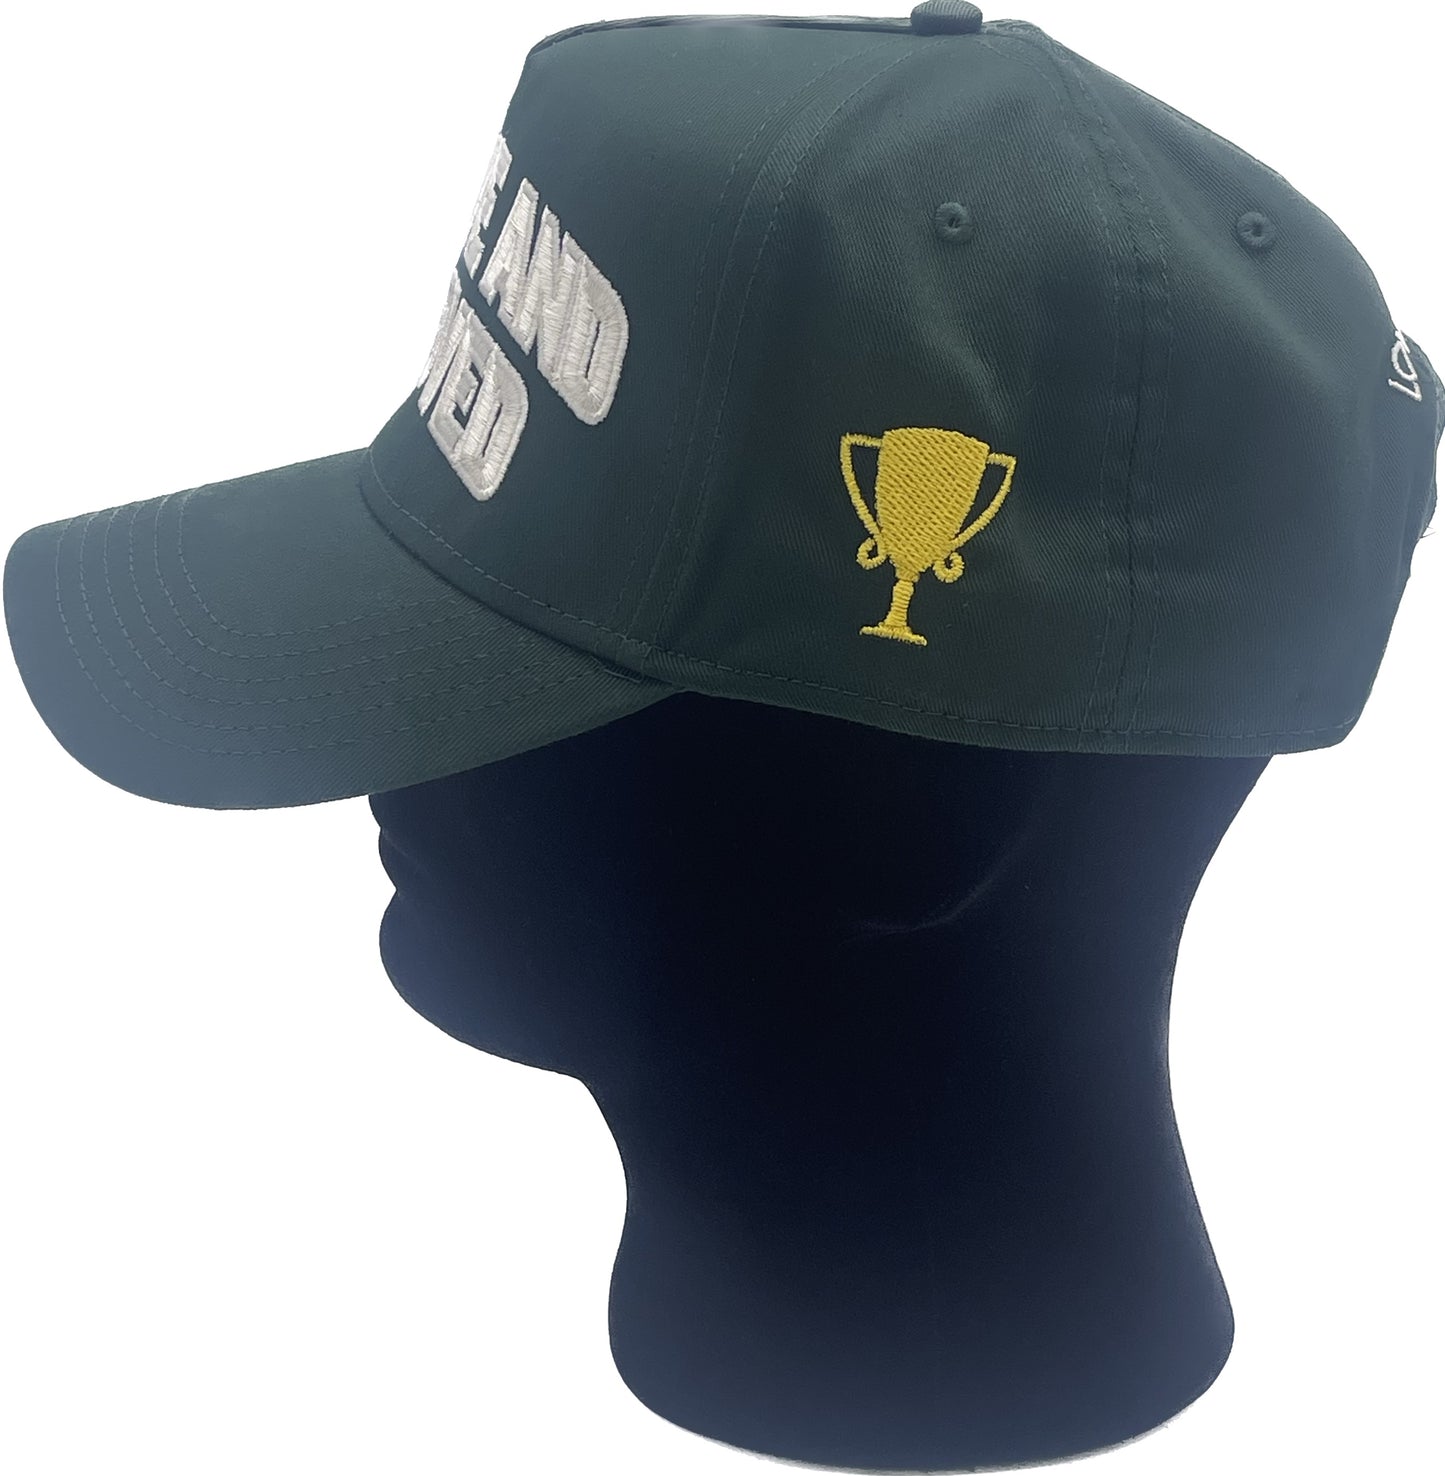 "To Love and Be Loved" Trophy Cap